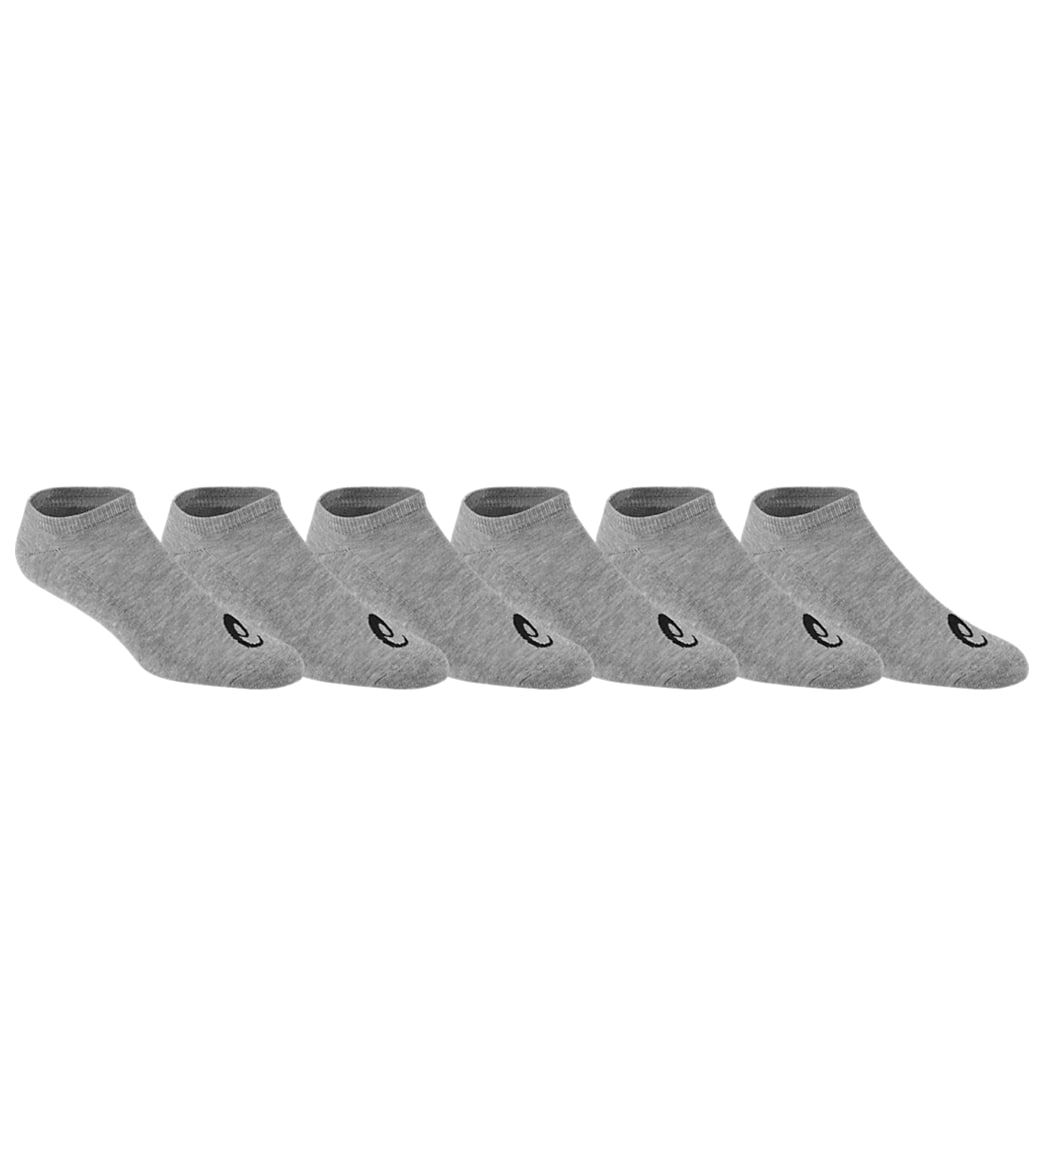 Asics Men's Performance No Show Socks 3 Pack - Grey Heather Assorted Small Size Small - Swimoutlet.com